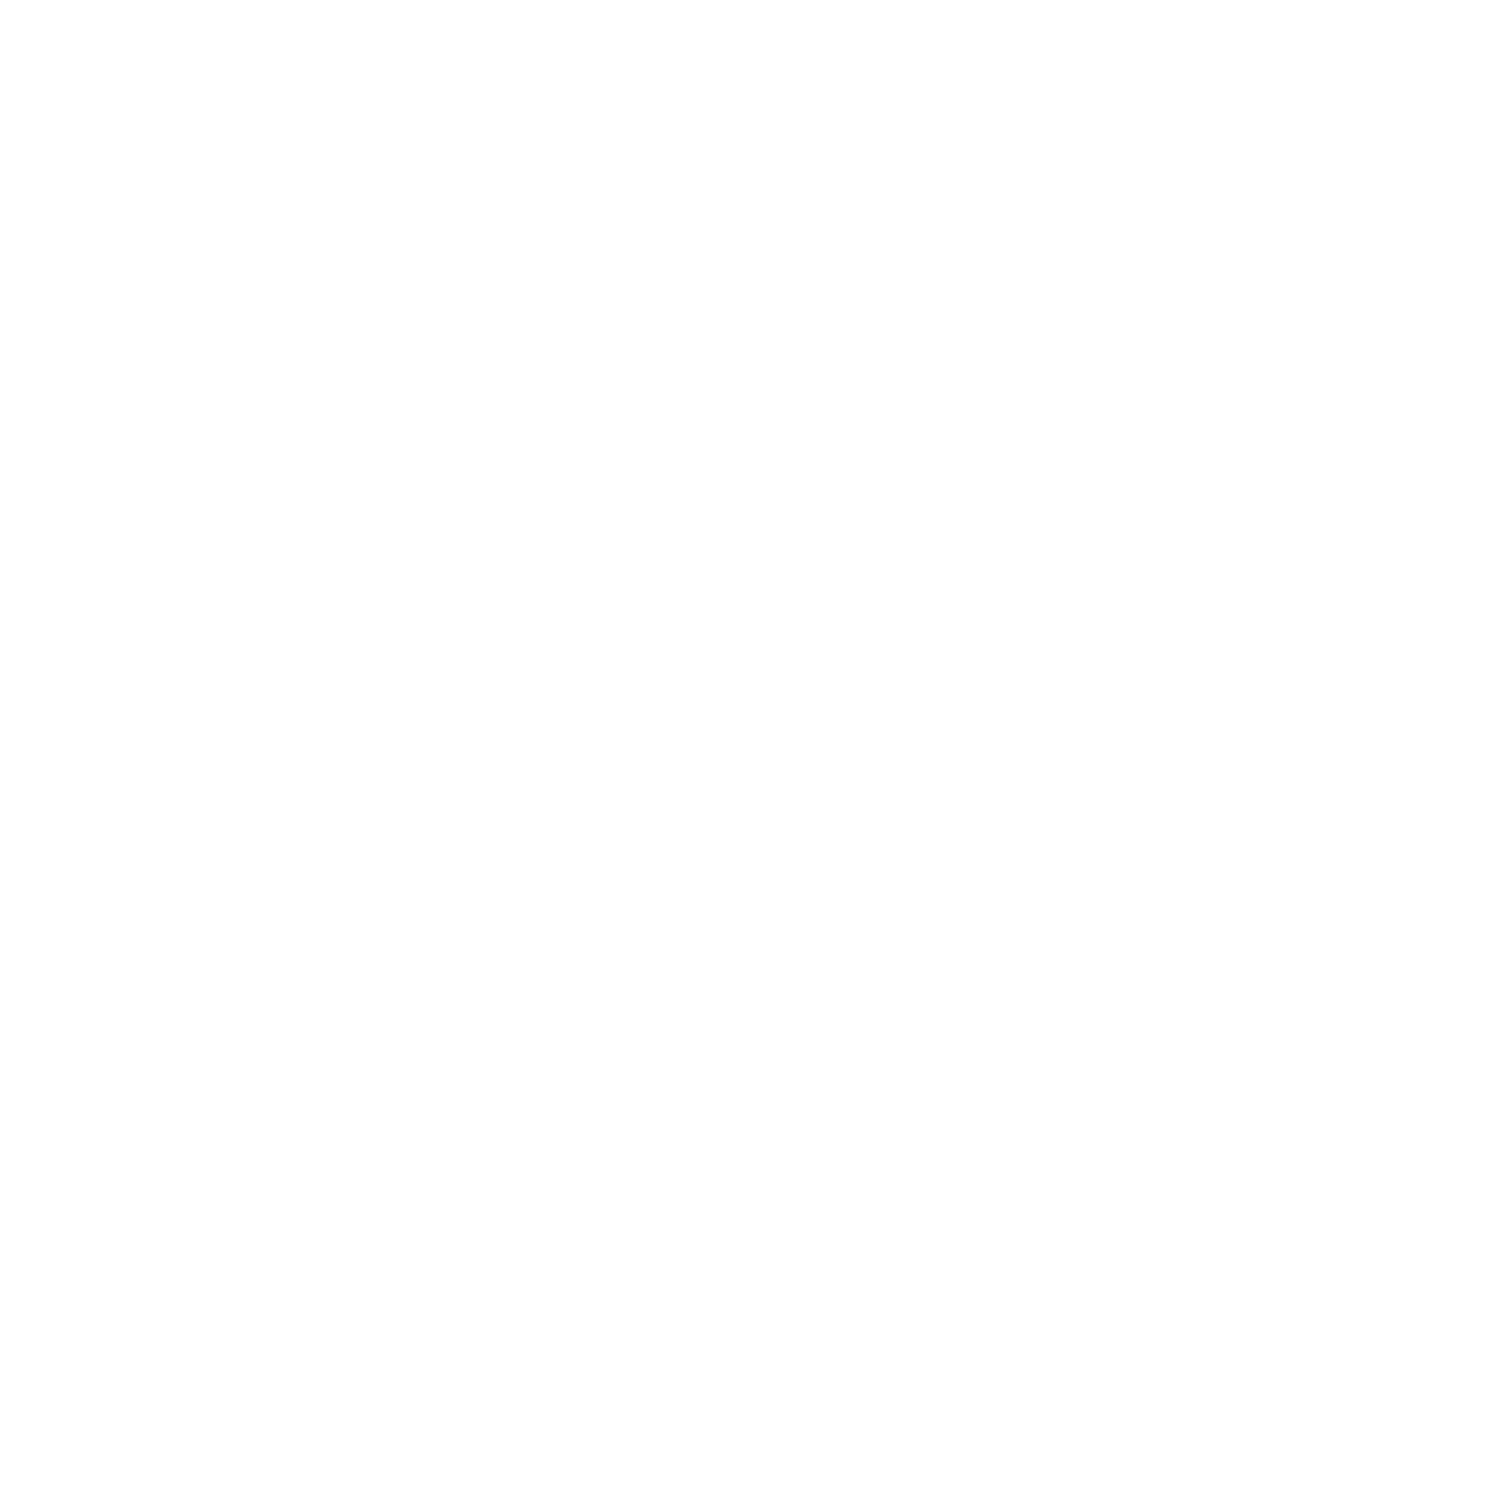 Partnership for the Goals